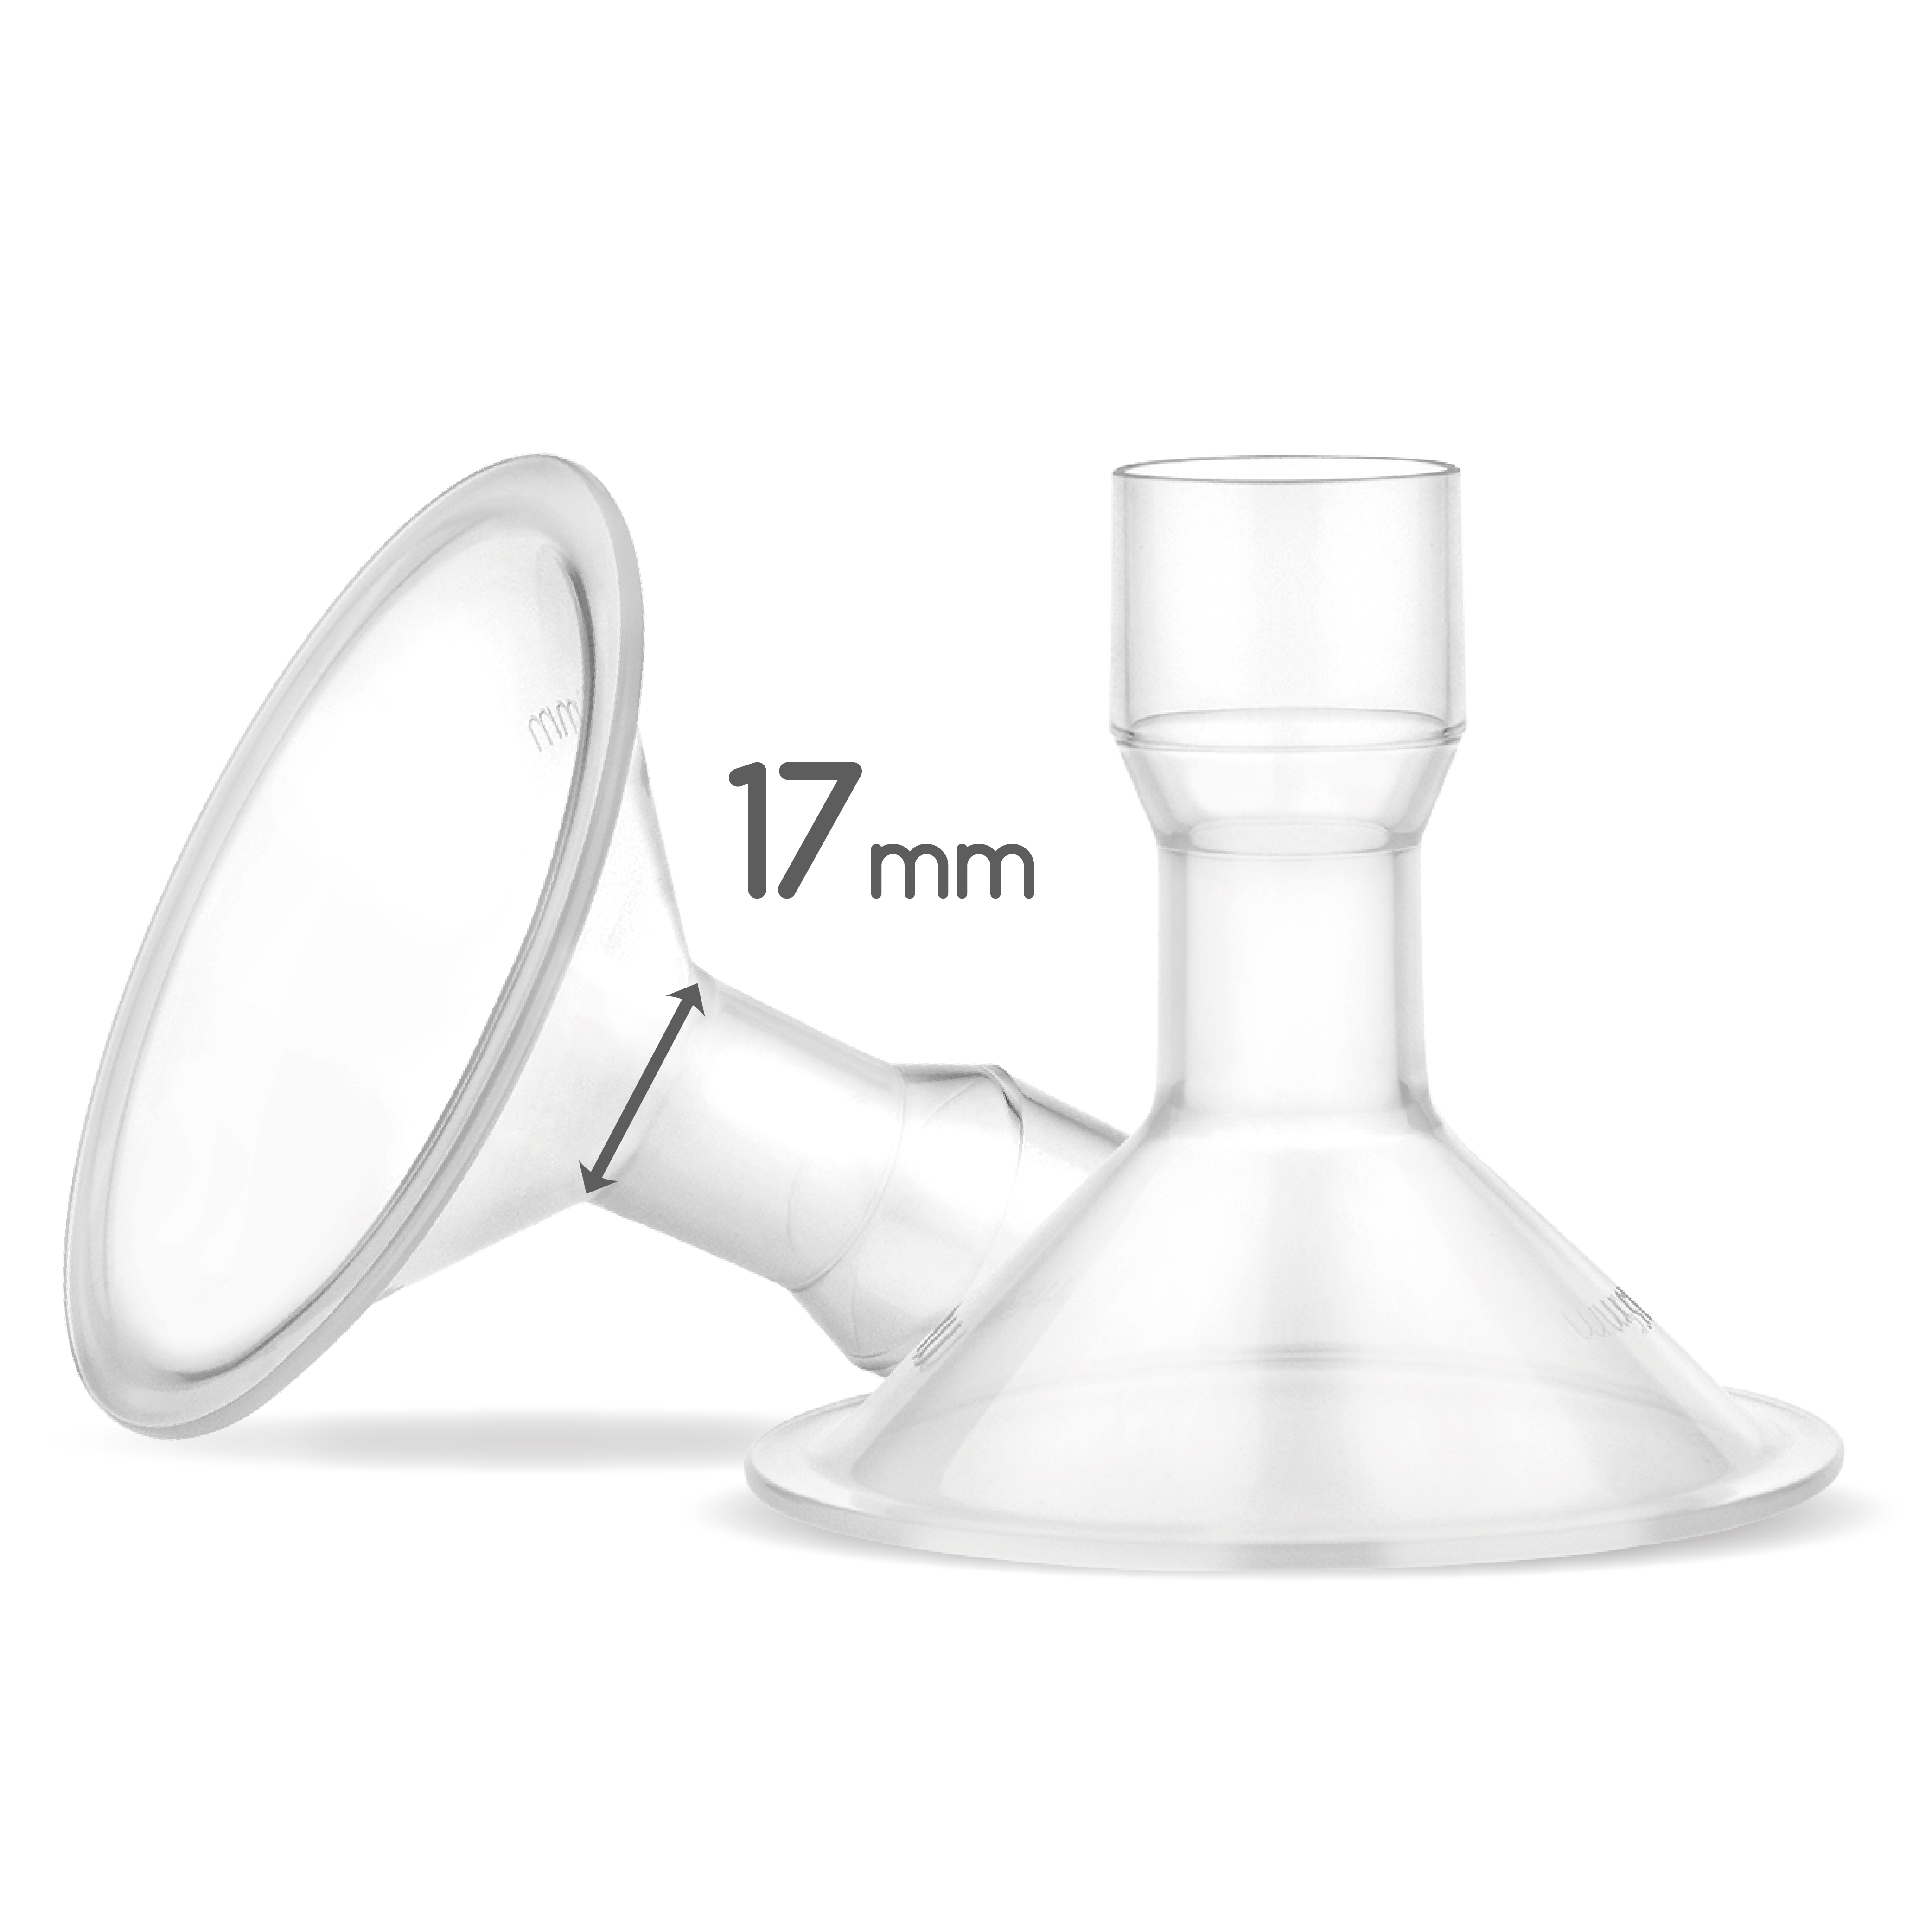 21 mm One-Piece Breastshield w/Valve and Membrane for Medela Breast Pumps; Replace Medela 21 mm Personal Fit Breast Shield and Connector; Made by Maymom 